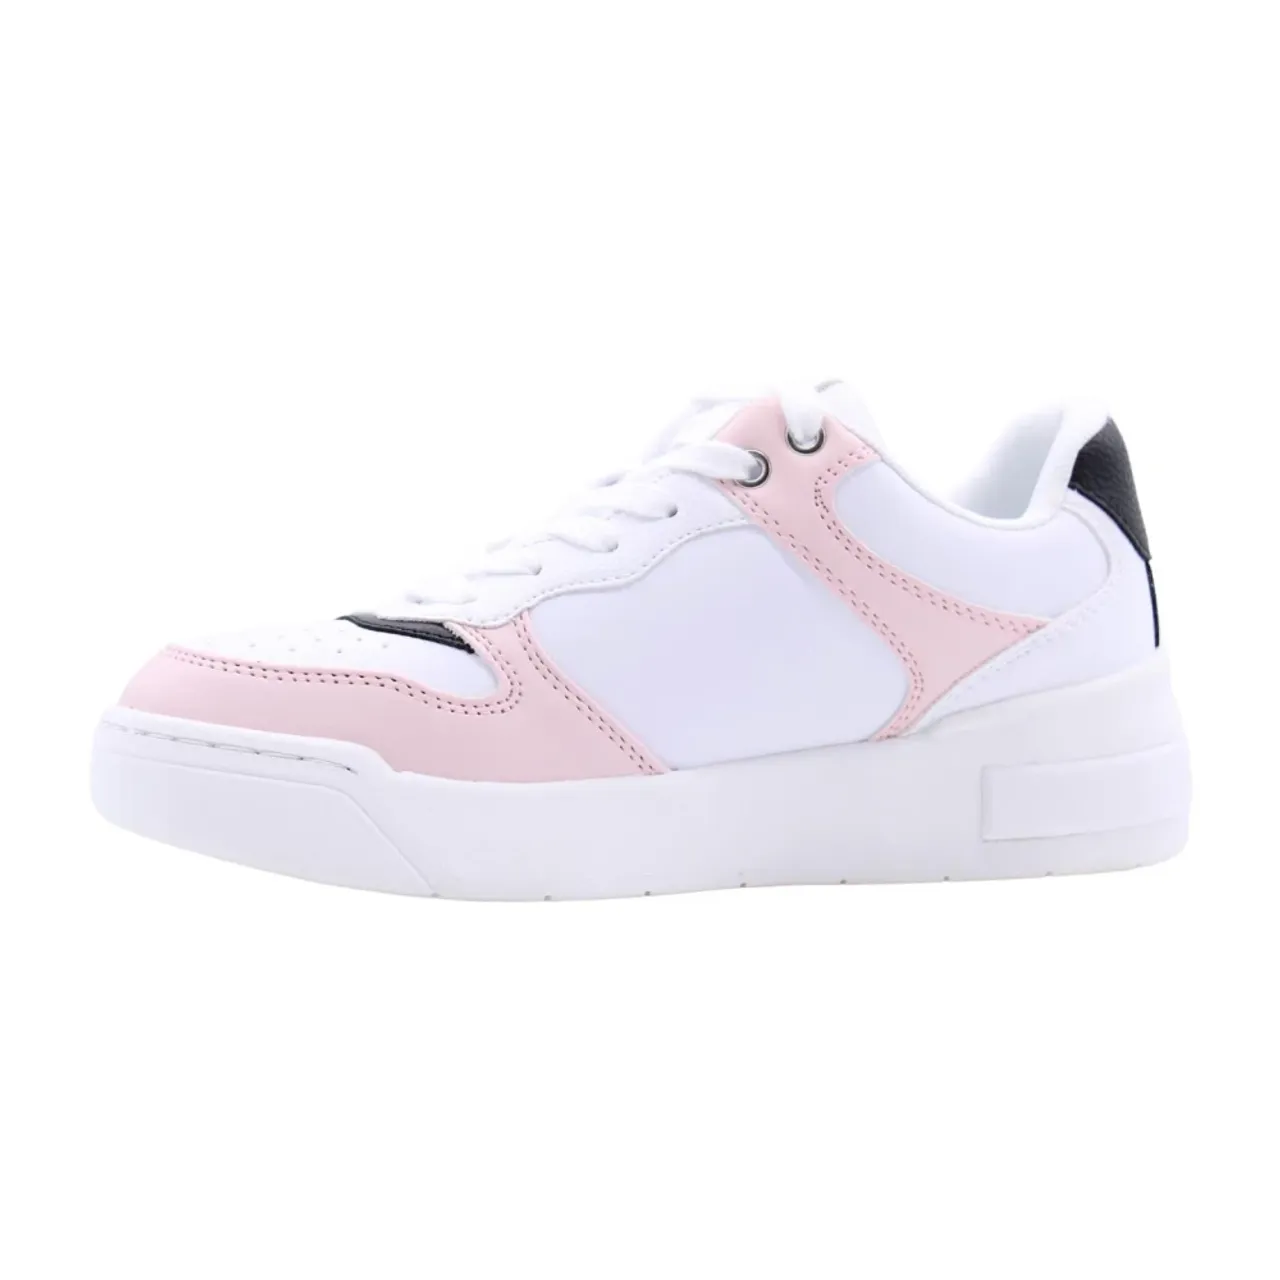 Guess , Middleton Sneaker ,Multicolor female, Sizes: